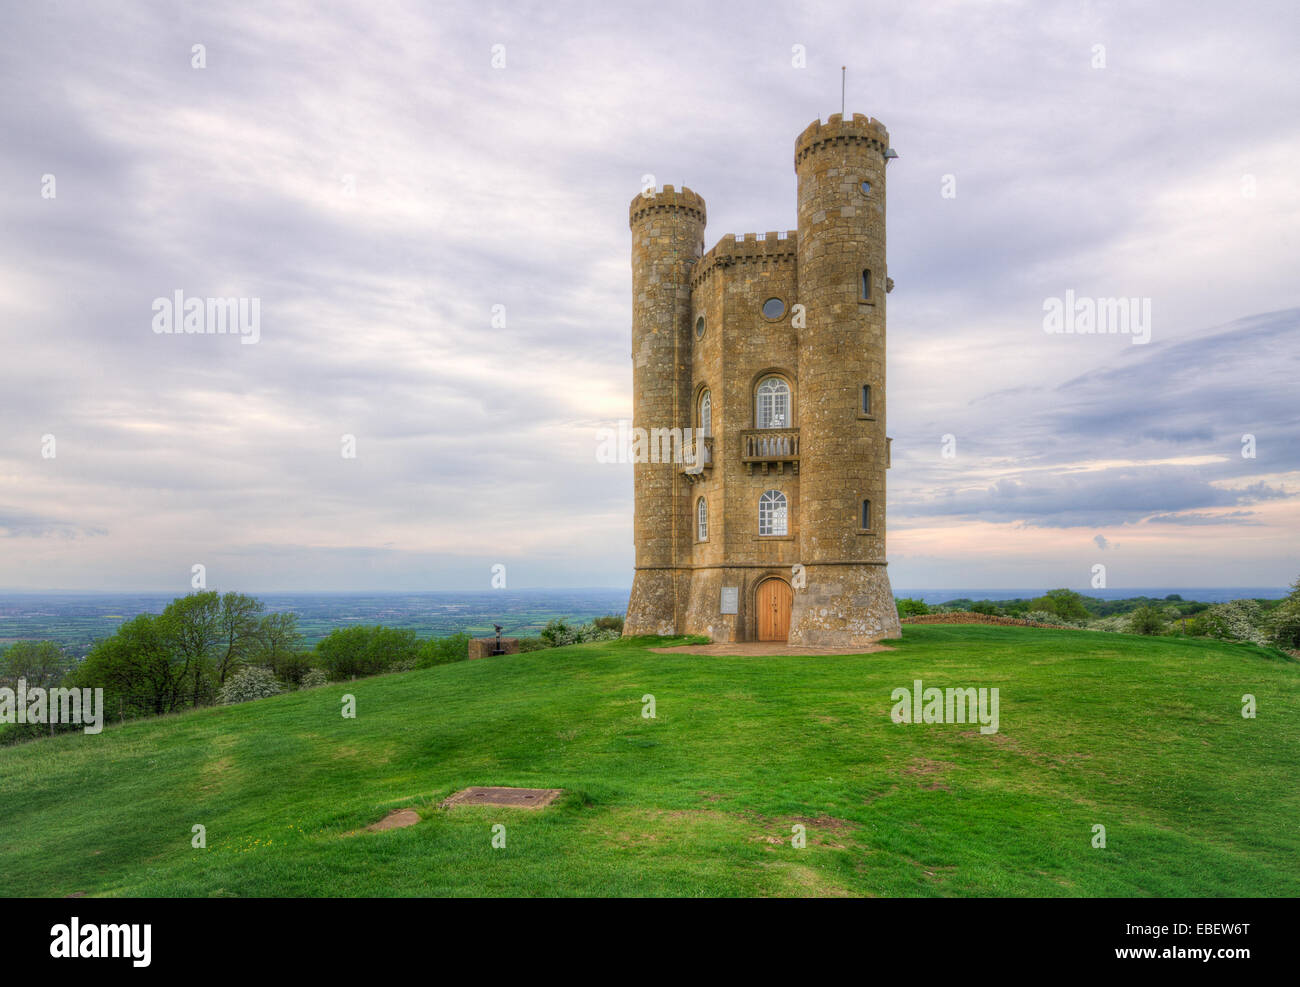 Broadway Tower in Worcestershire as seen at sunset Stock Photo